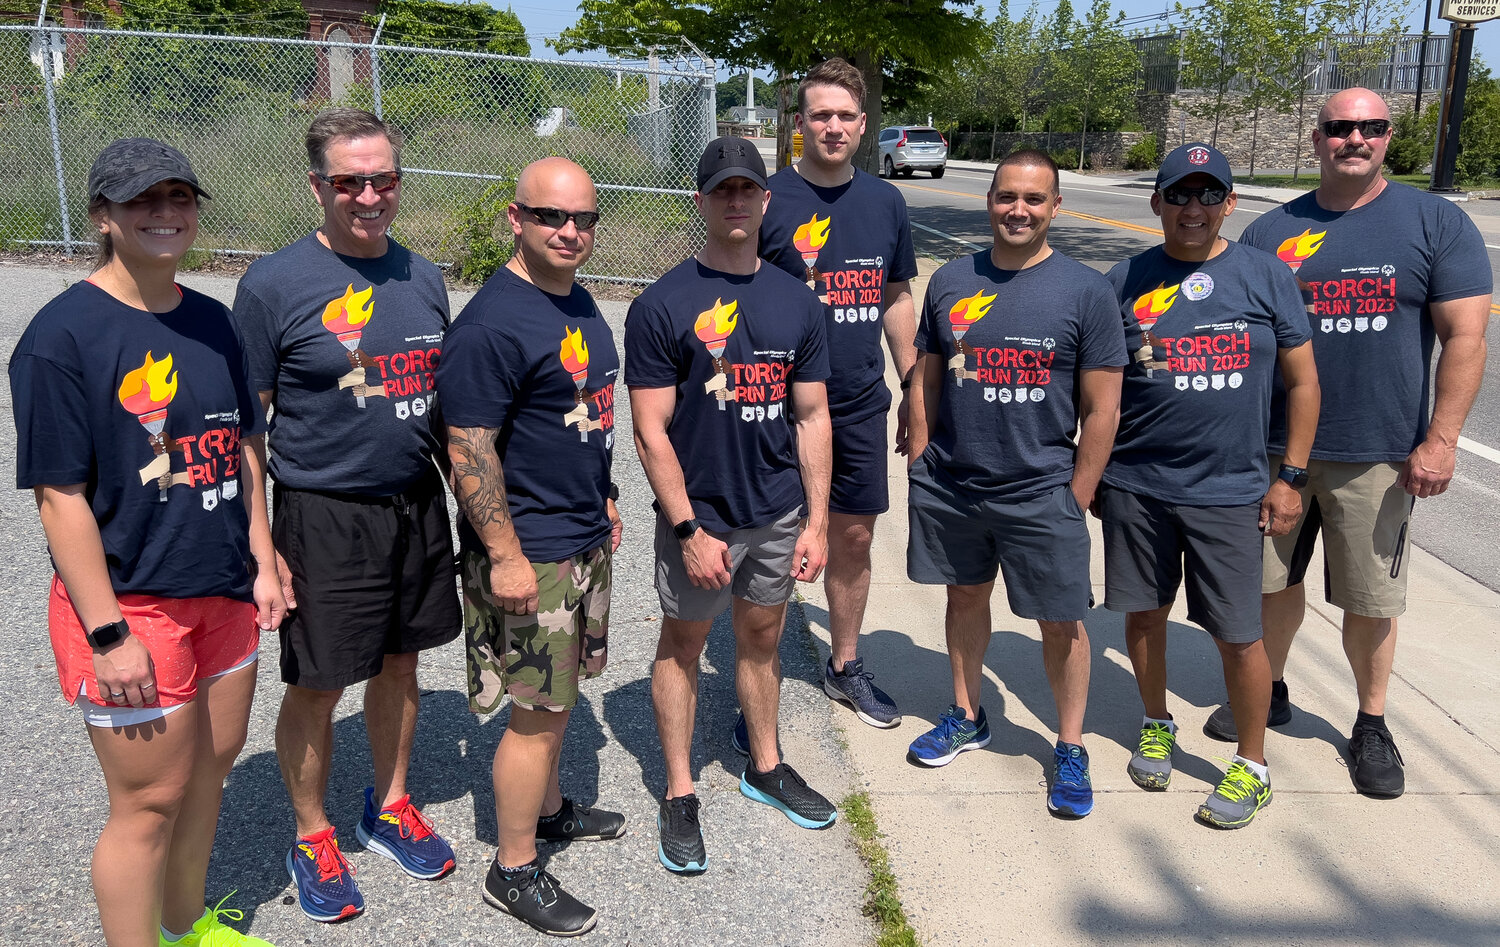 Barrington Police Officer Kelsey Maynard, Police Chief Michael Correia, Police Officers Tim Oser, Regan Jeffrey, Sean Murphy, Josh Melo and Barrington Firefighters Jesus Sanchez and Ed Owens (from left to right) gather for a group photo before participating in the annual Special Olympics torch run.